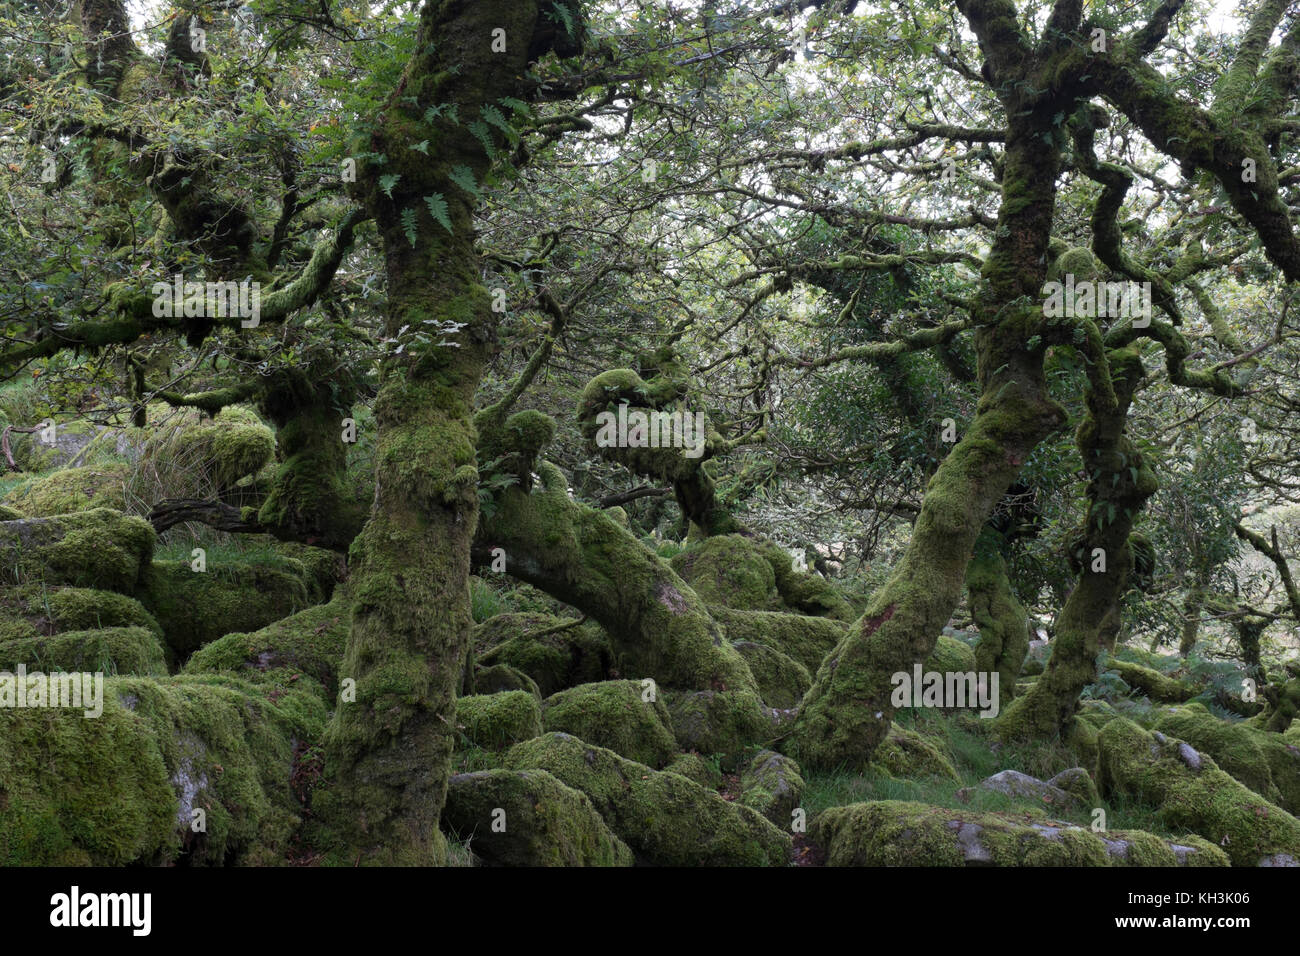 Mossy forest of Wistman's wood Stock Photo